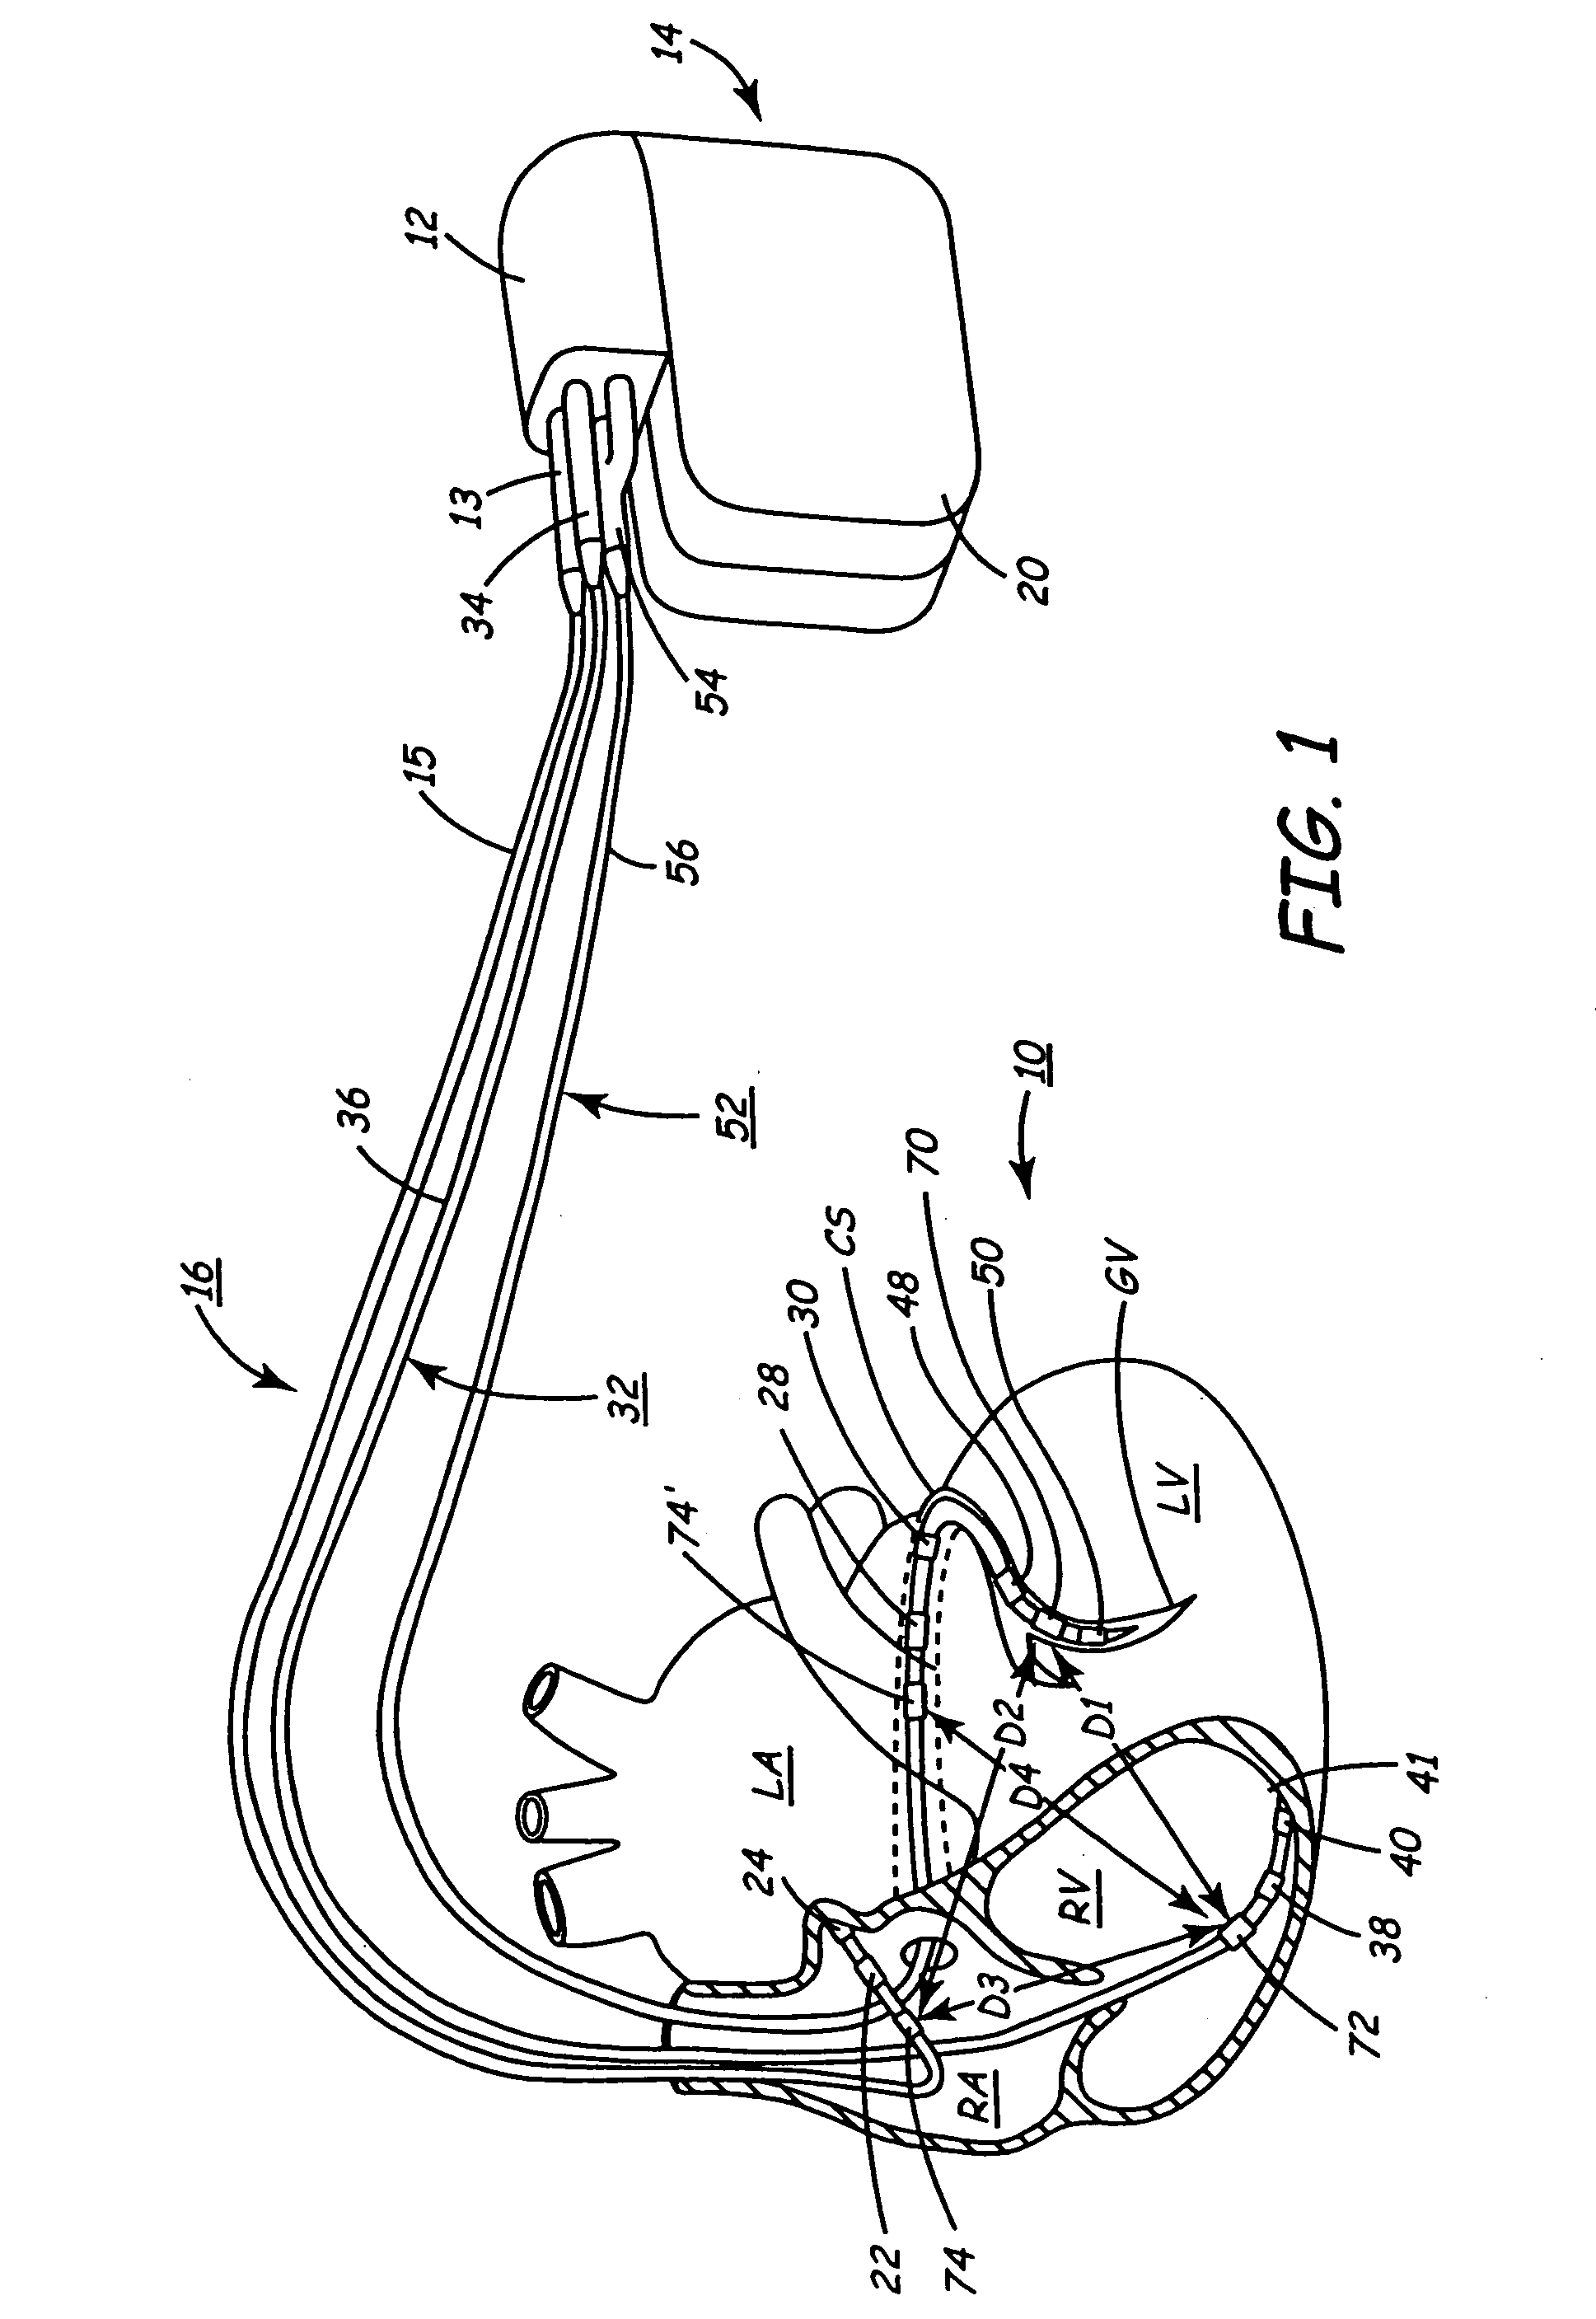 Implantable medical device employing sonomicrometer output signals for detection and measurement of cardiac mechanical function